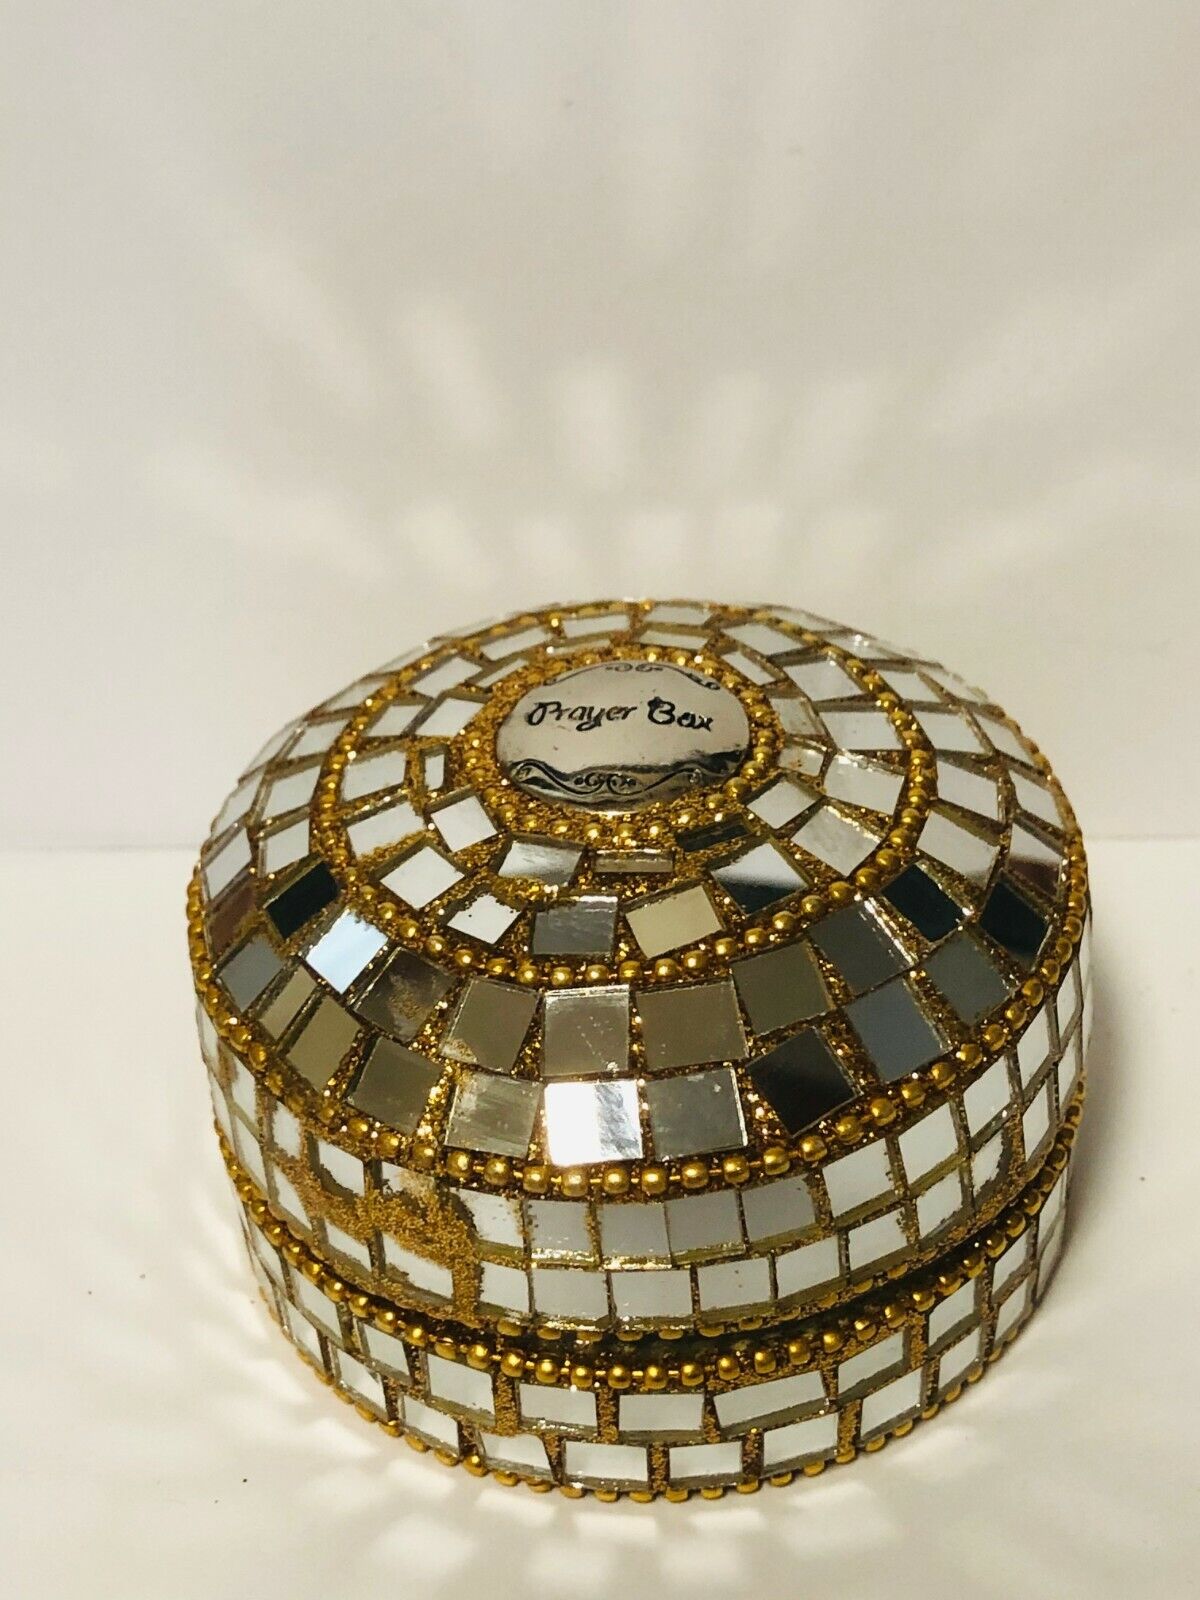 Prayer Box, Decorative Mirror/Gold Sequins Round Box, 3" New - Bob and Penny Lord